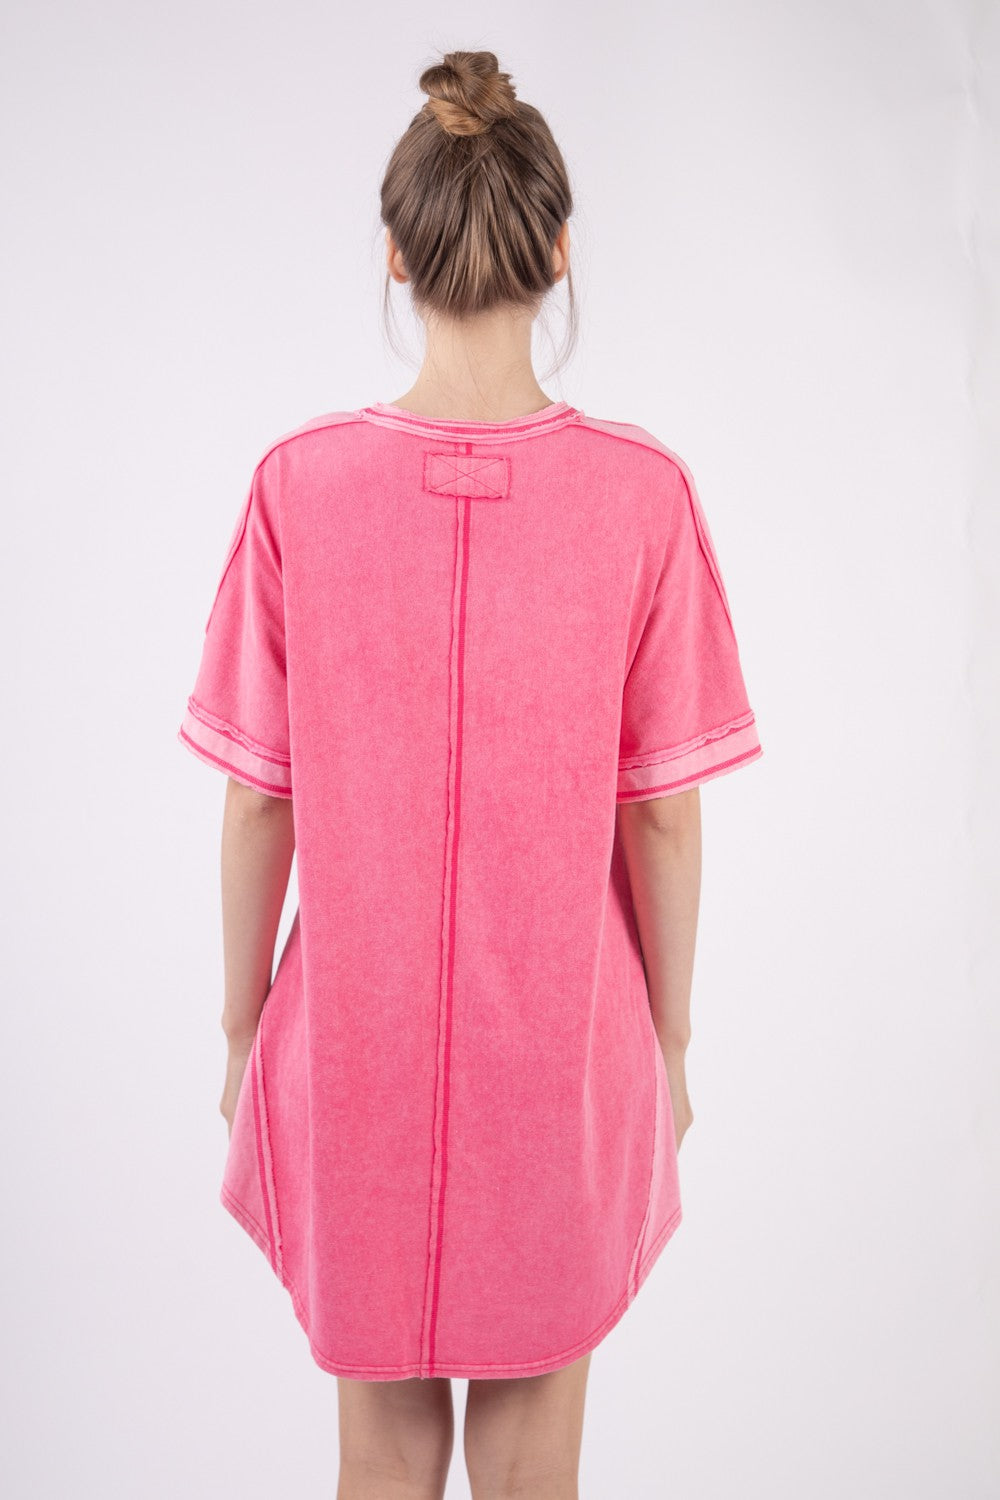 The Mimi Mineral Wash TShirt Dress V Neck with Pockets Pink